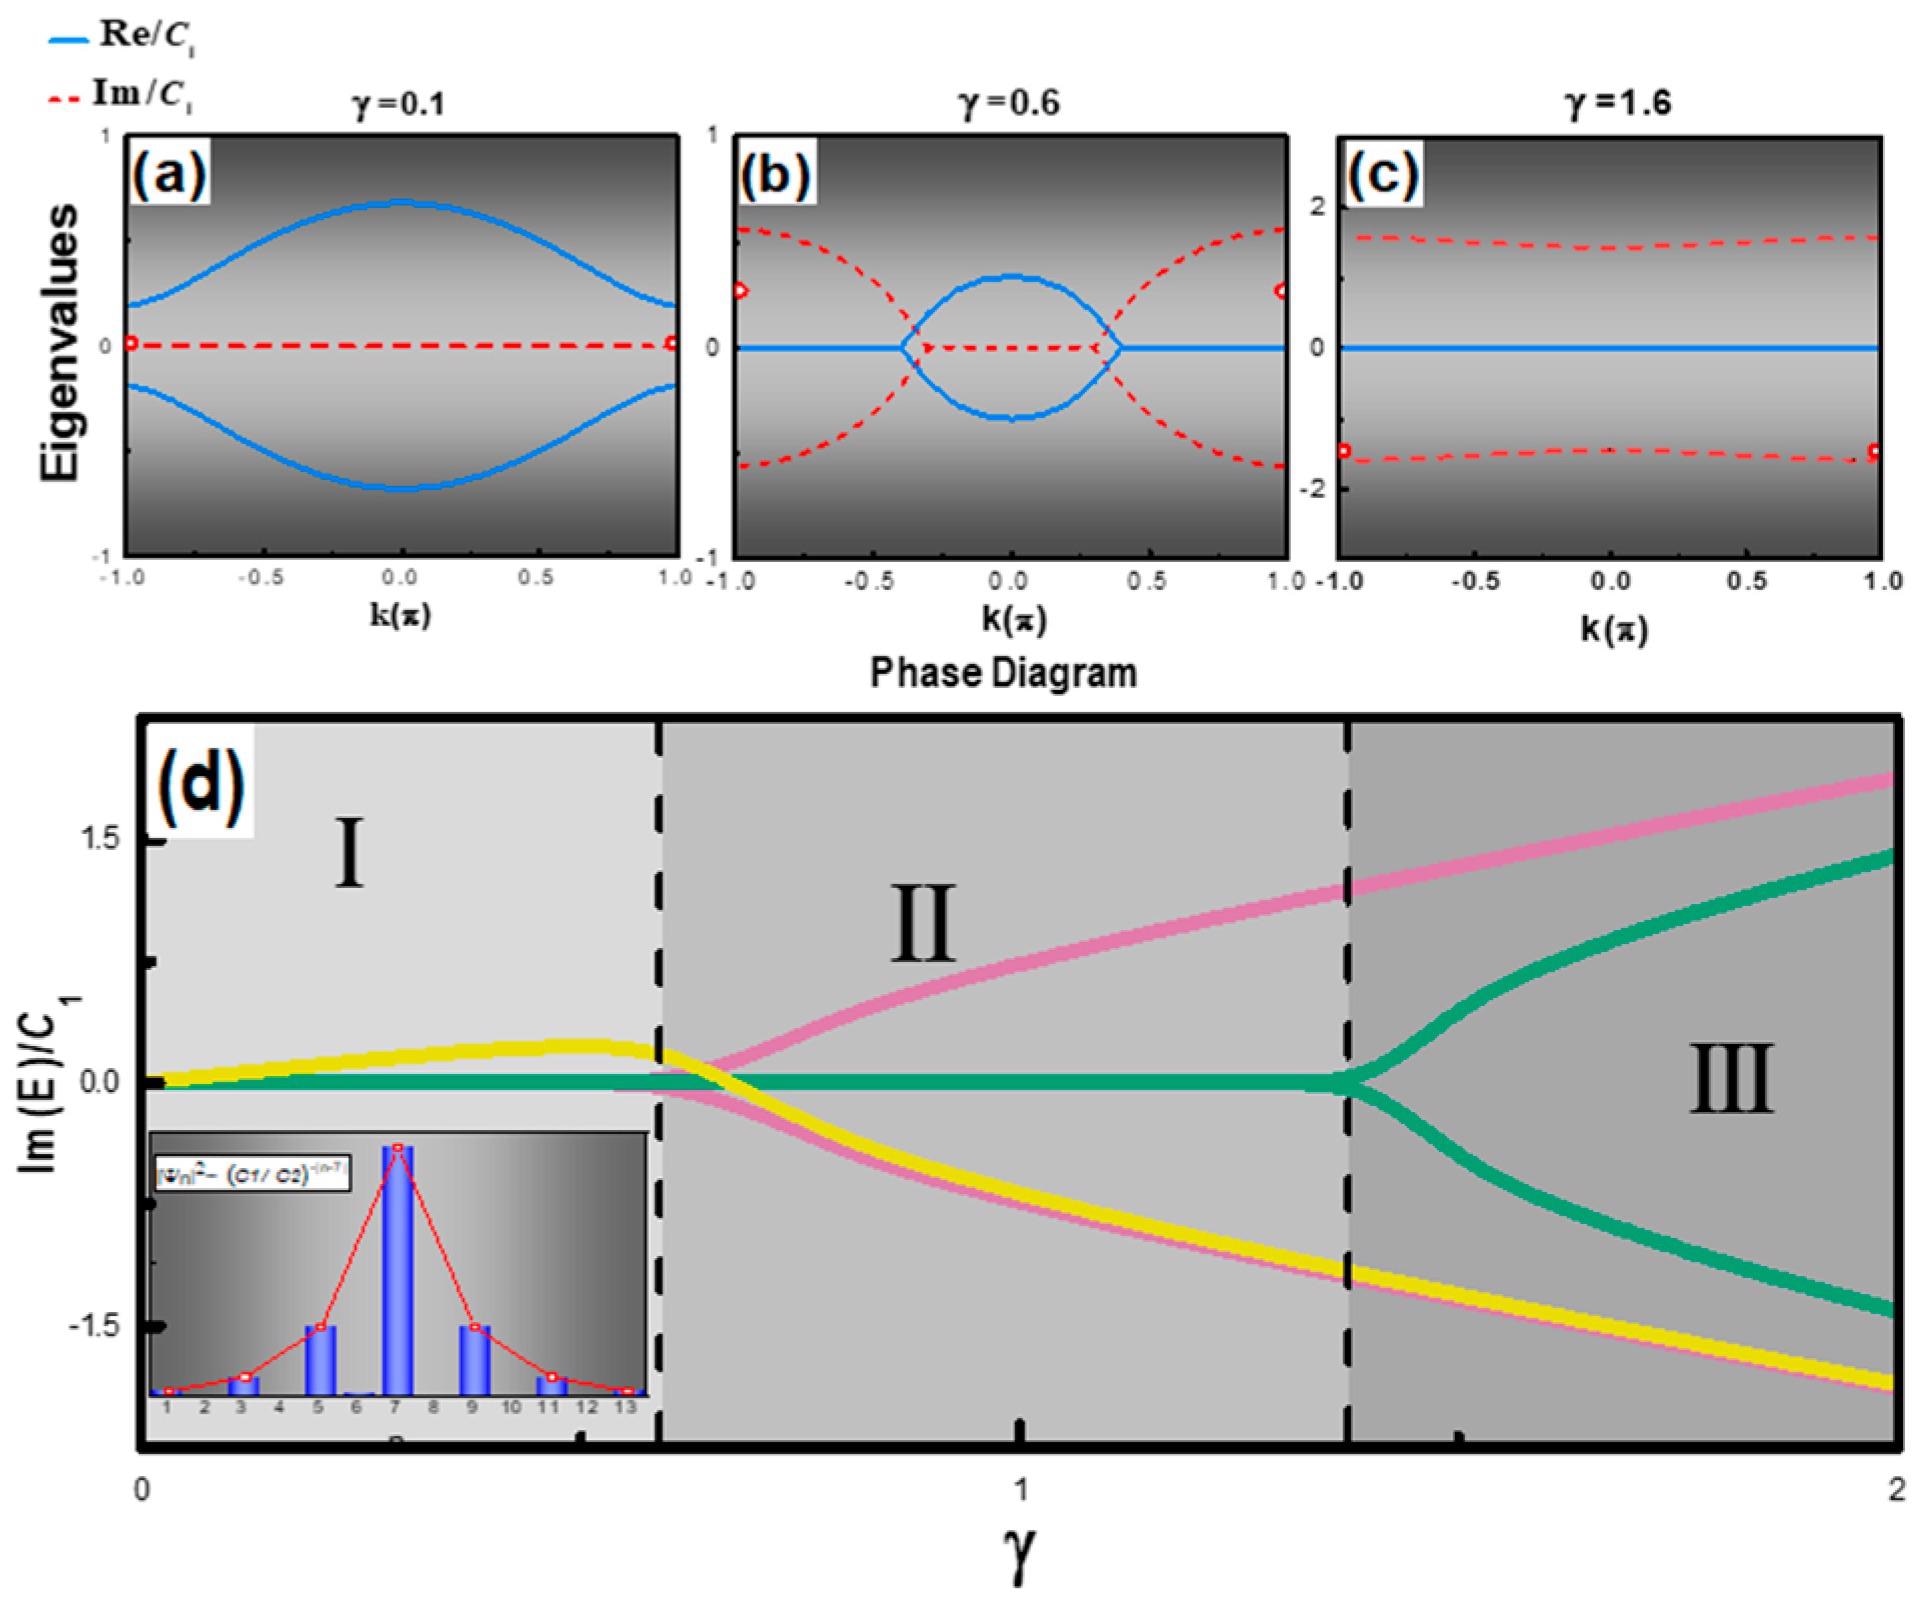 Complex eigenvalue diagrams of the SSH laser chain system in phase I (a), II (b), and III (c), and red circles denote imaginary parts of the topological zero state. (d) Phase diagram of the complex SSH chain, the yellow curve (color online) represents the topological mode, pink and green curves show the representative bulk modes in the system. The inset shows the topological mode profile calculated at ? = 0.1, along with the theoretical profile ?(t1/t2)-|n| (red curve).